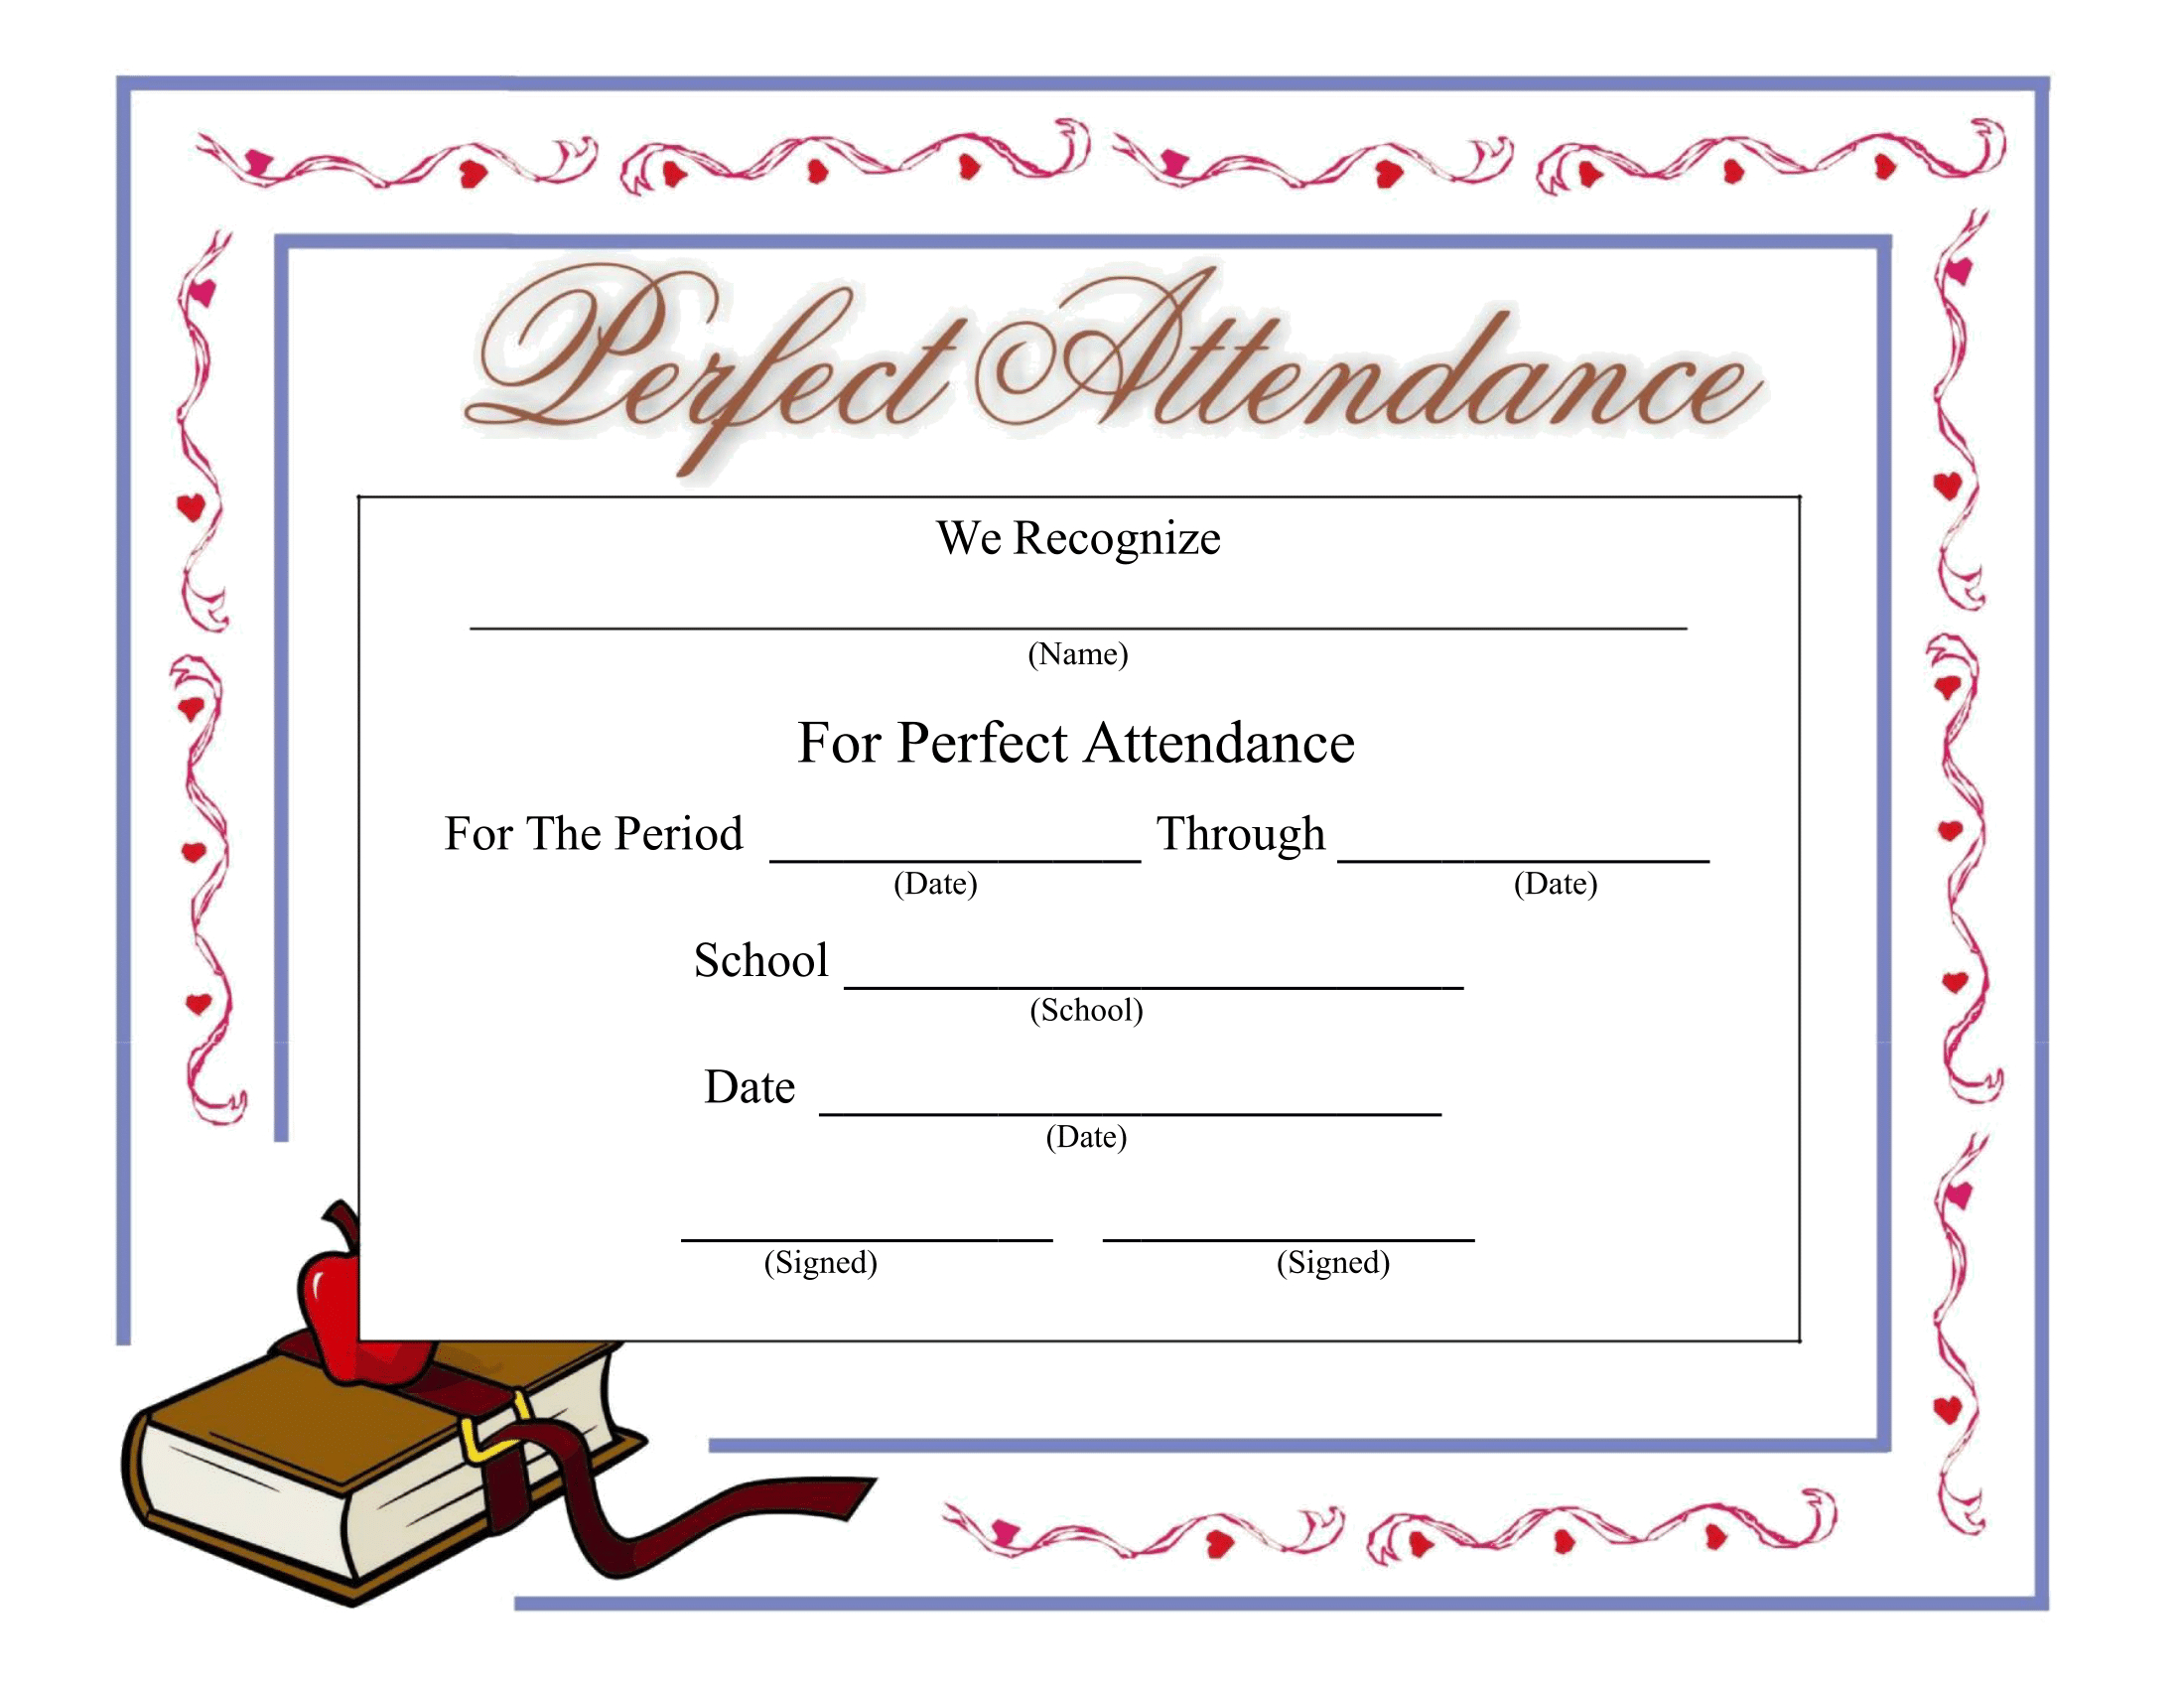 Perfect Attendance Certificate - Download A Free Template In Perfect Attendance Certificate Template